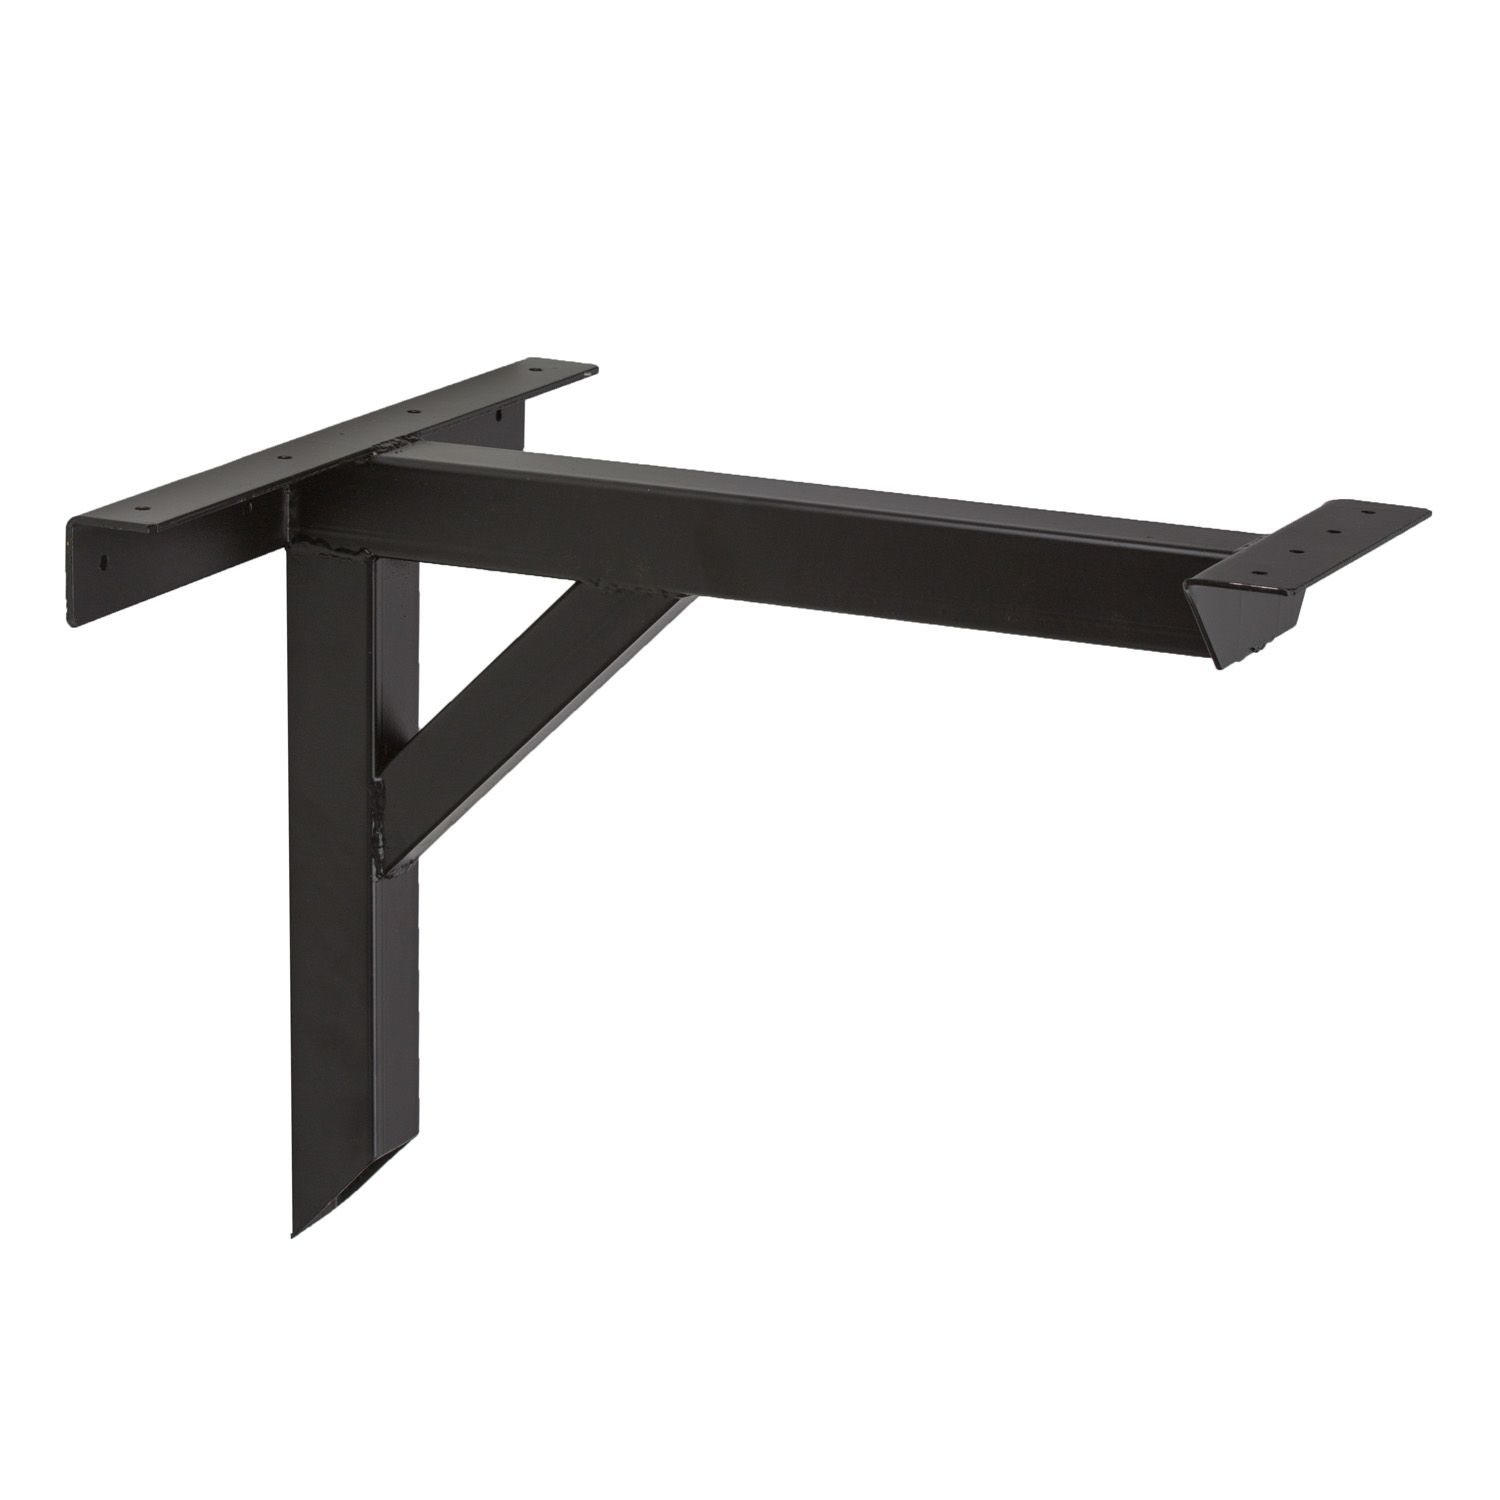 Small Cantilever Table Base